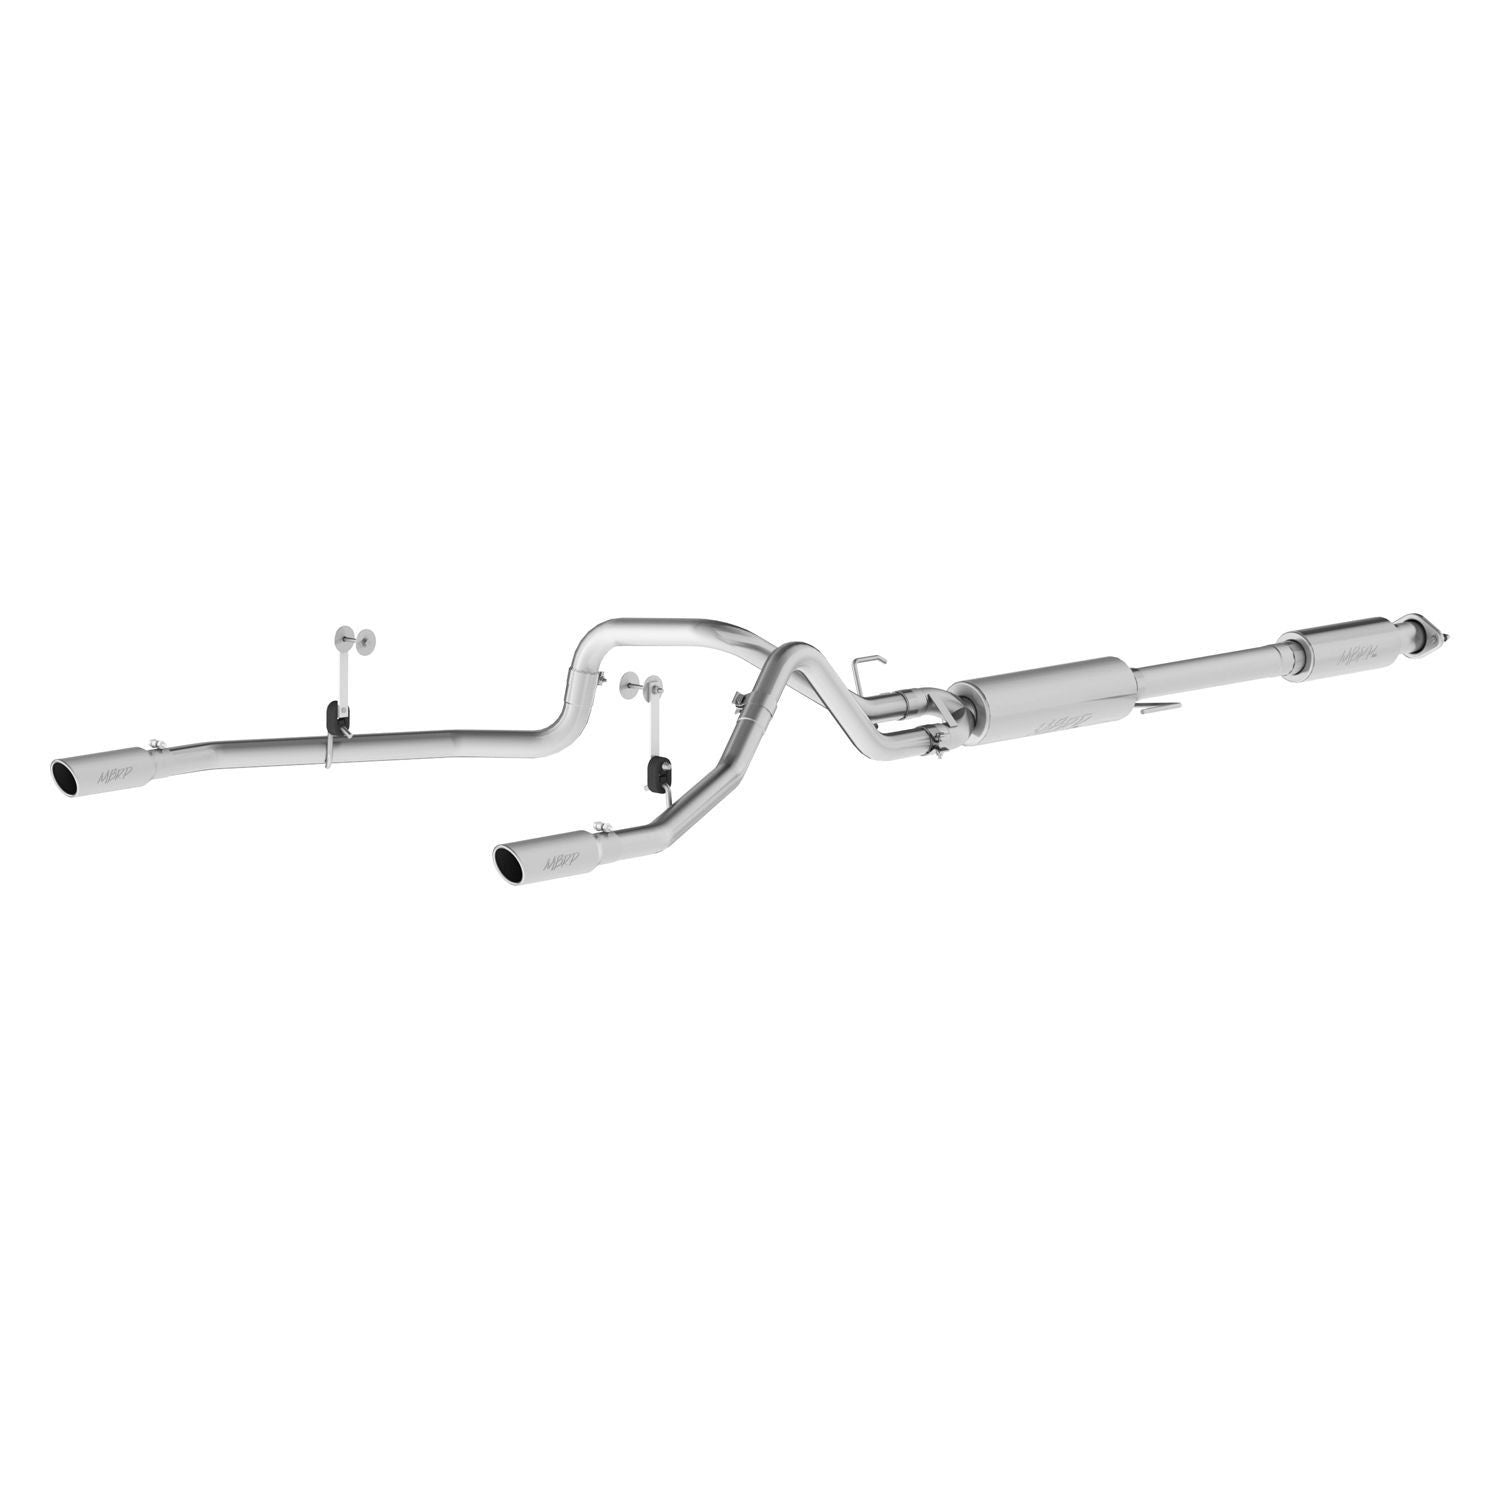 MBRP S5258AL - 2.5" Cat Back Aluminized Steel Exhaust System with Dual Rear Exit for FORD F-150 5.0L 15-20